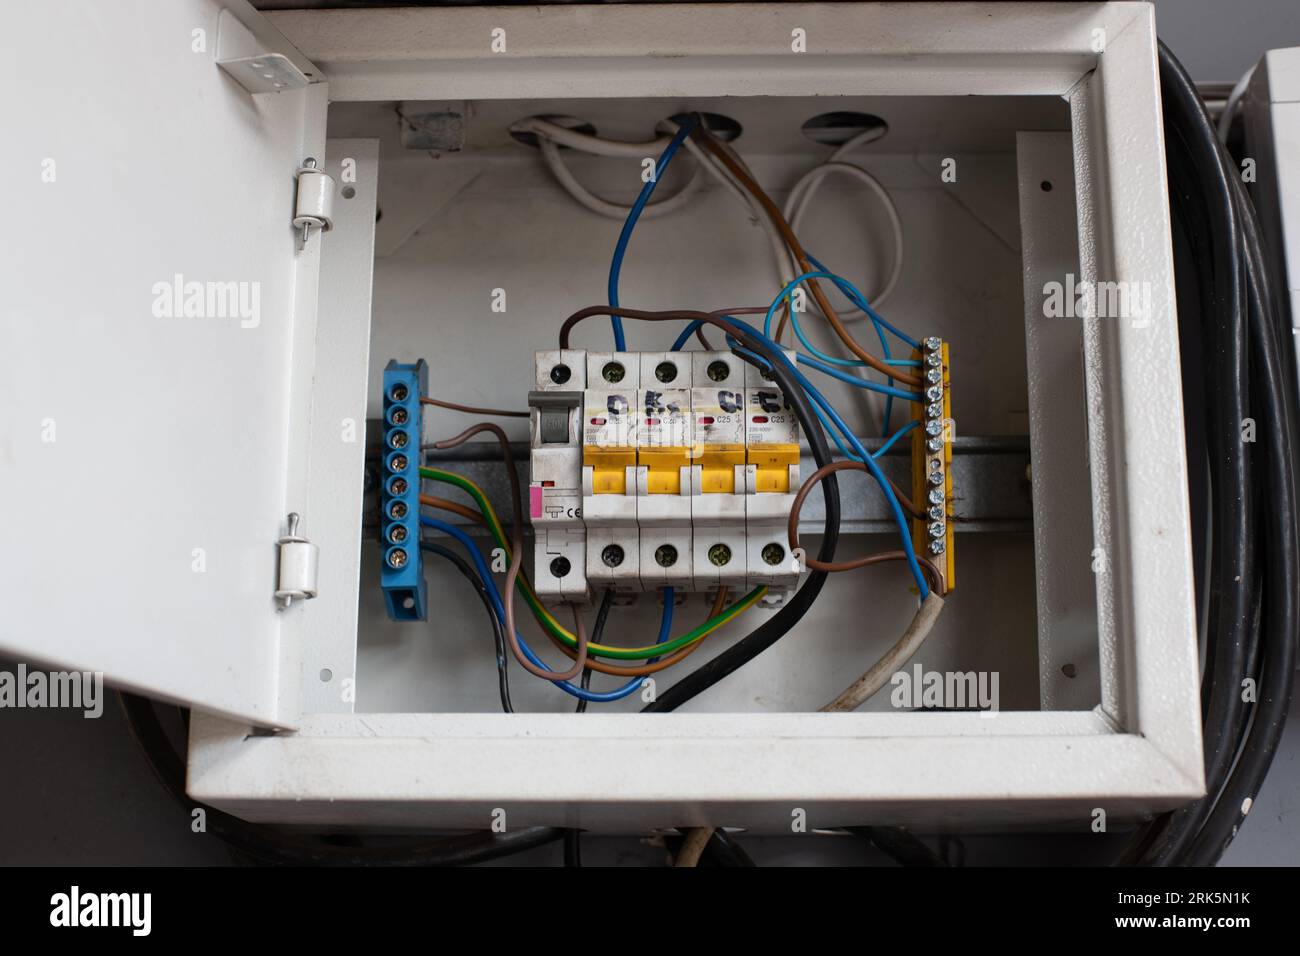 Electrical panel board with accessories such as, contractor, connector, elcb three phase and overload relay, colour cables. Stock Photo